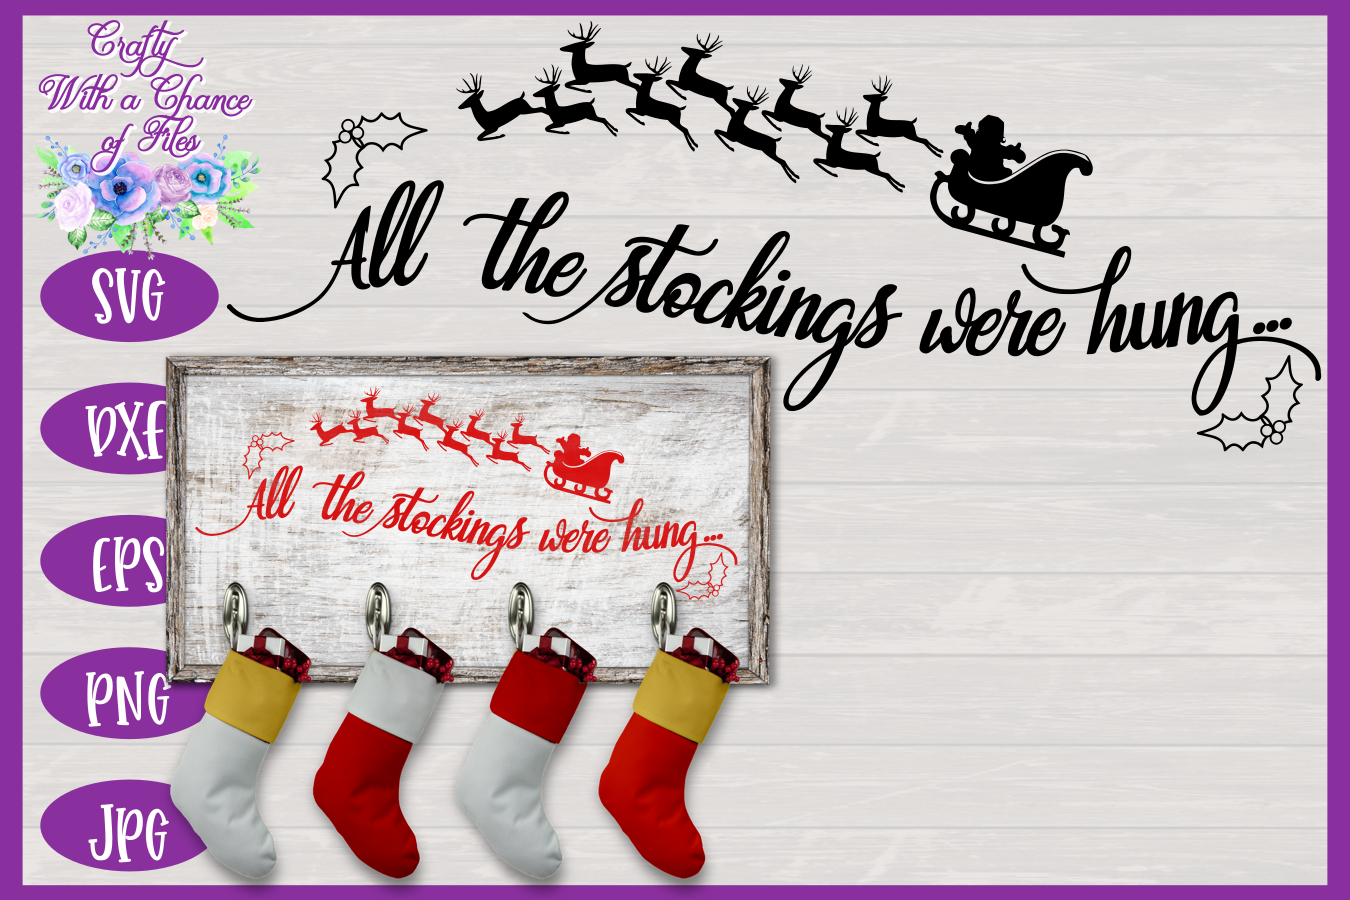 Download Christmas Svg All The Stockings Were Hung Svg Stocking Holder Svg By Crafty With A Chance Of Files Thehungryjpeg Com